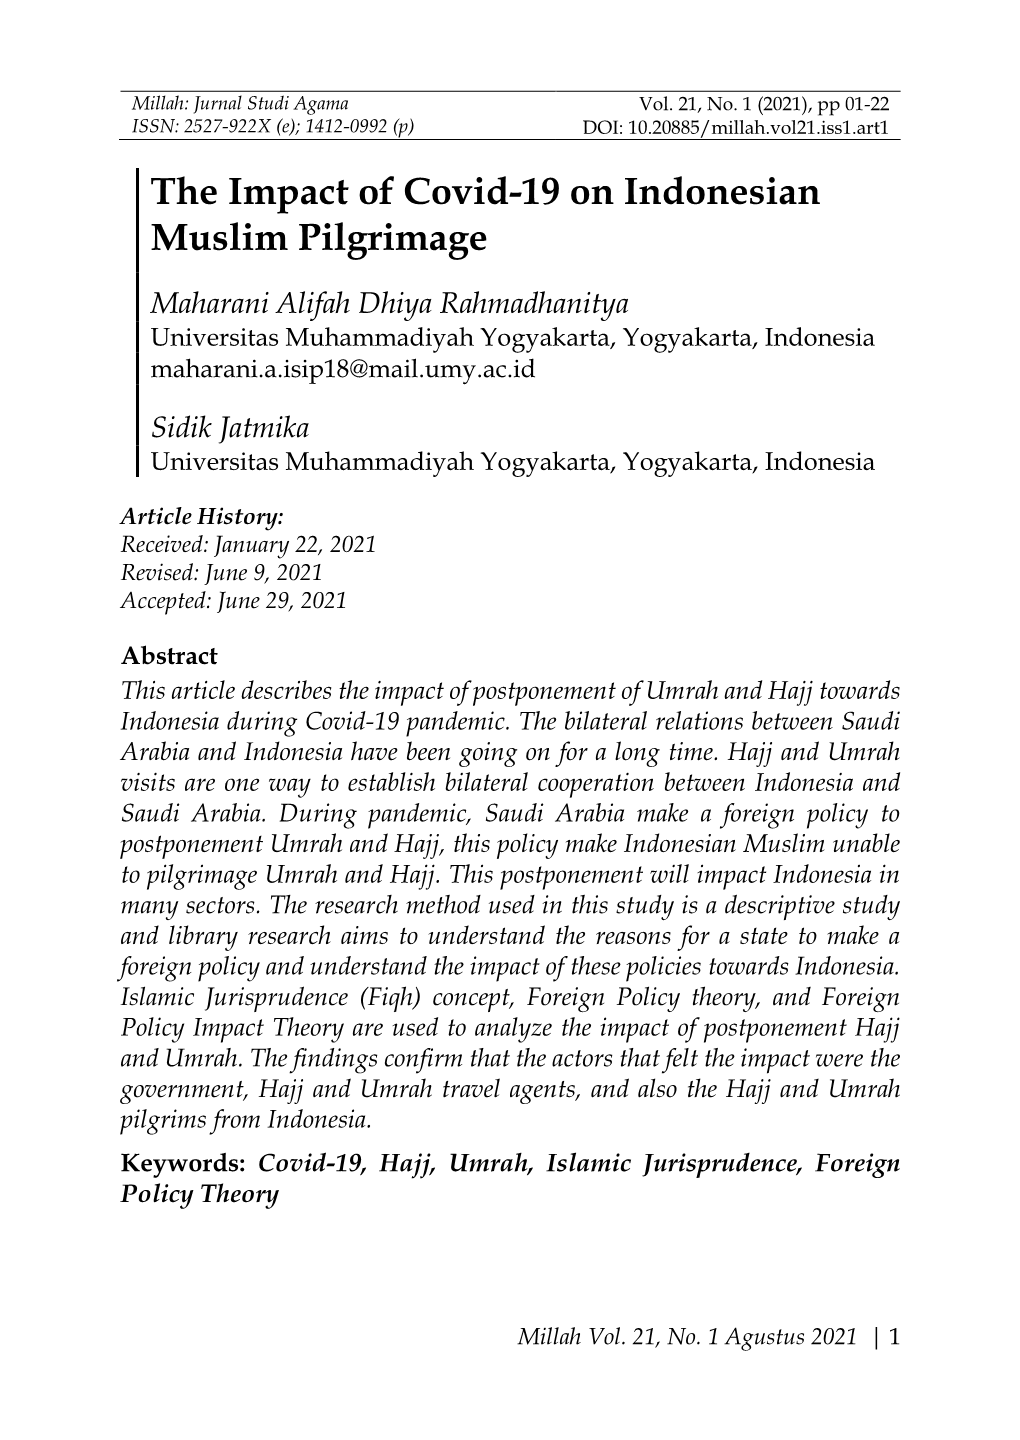 The Impact of Covid-19 on Indonesian Muslim Pilgrimage